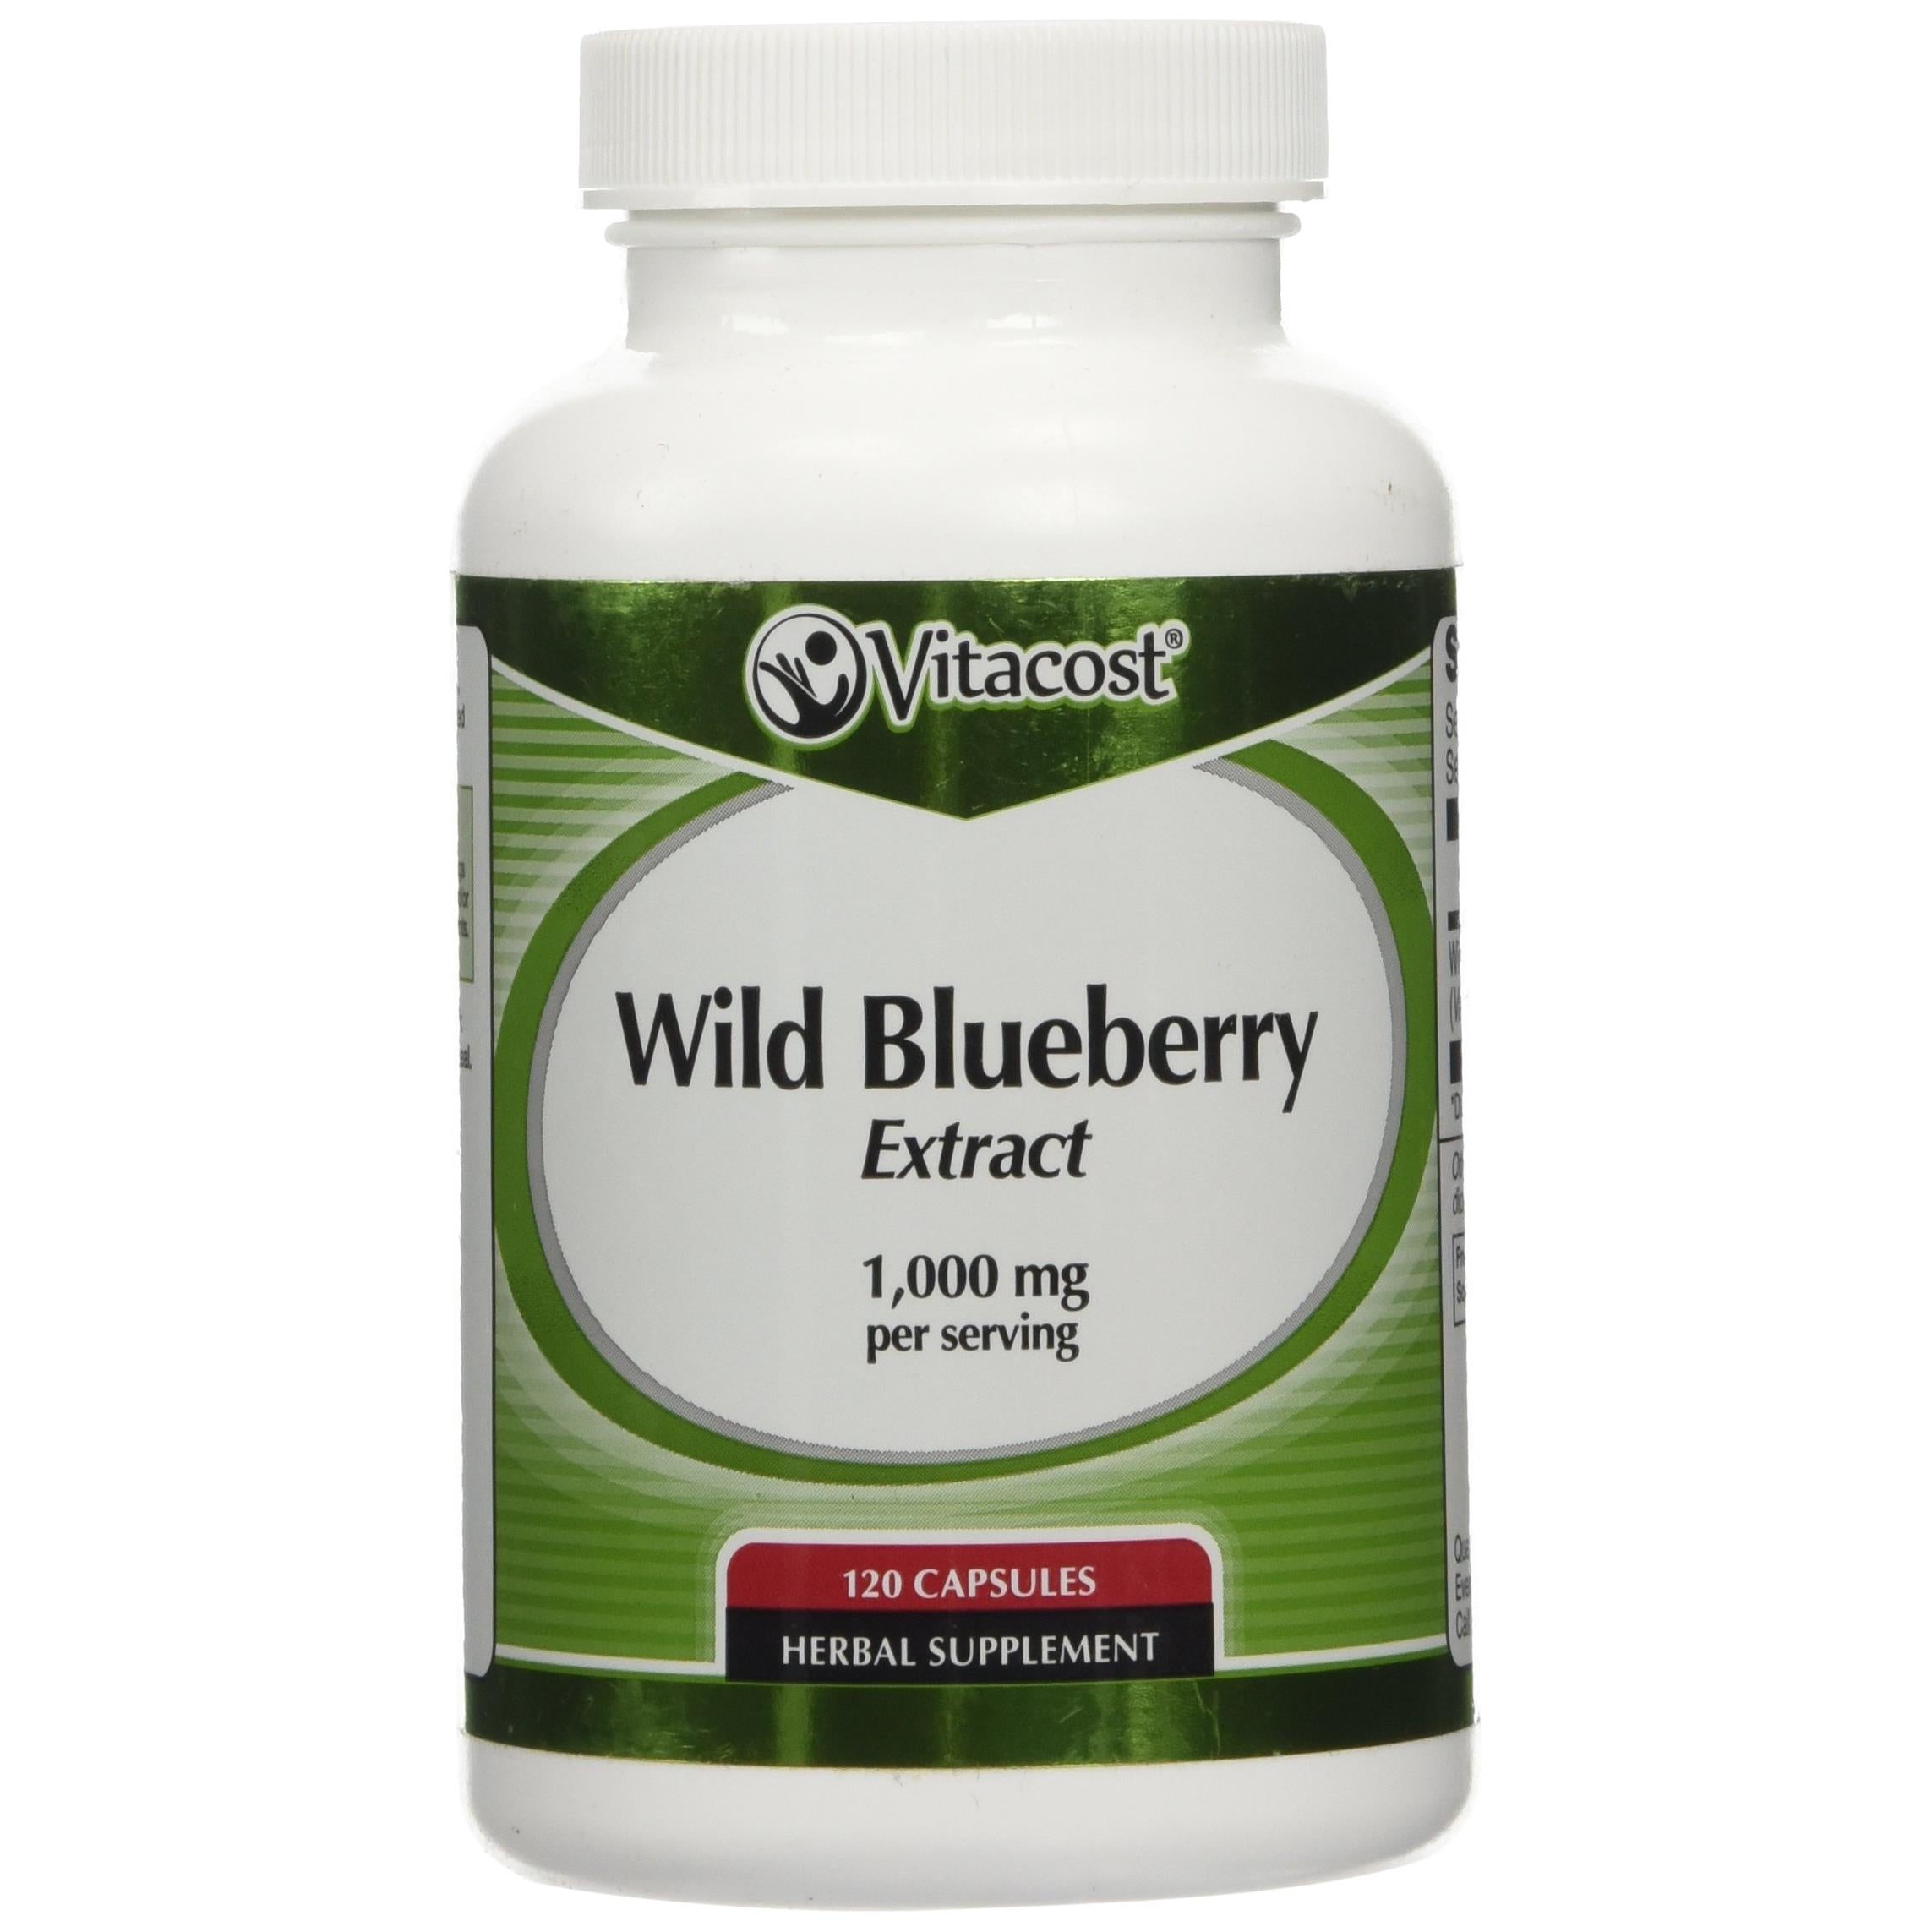 Vitacost Wild Blueberry Extract -- 1,000 mg per Serving - 120 Capsules